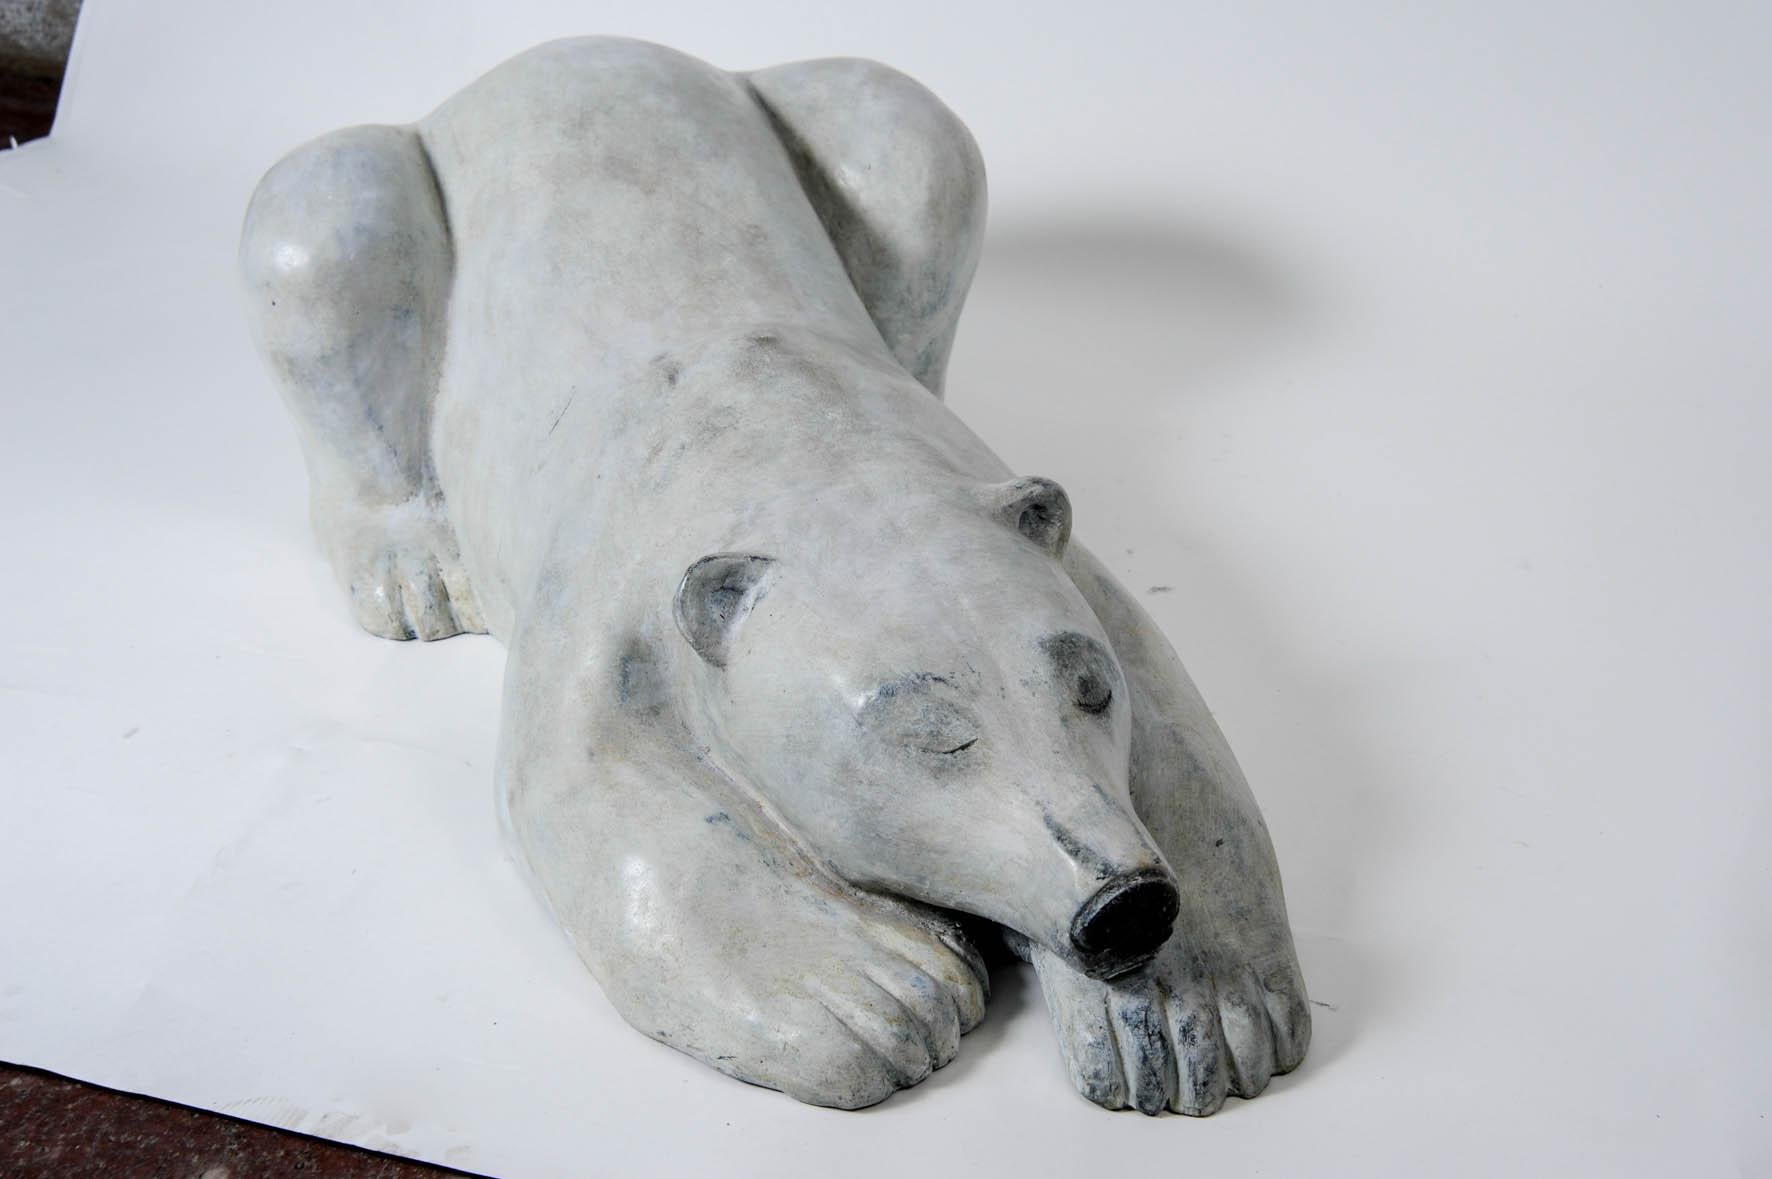 Fantastic polar bear in solid bronze
Signed but unreadable
Would be fantastic in your mansion in Aspen.
 